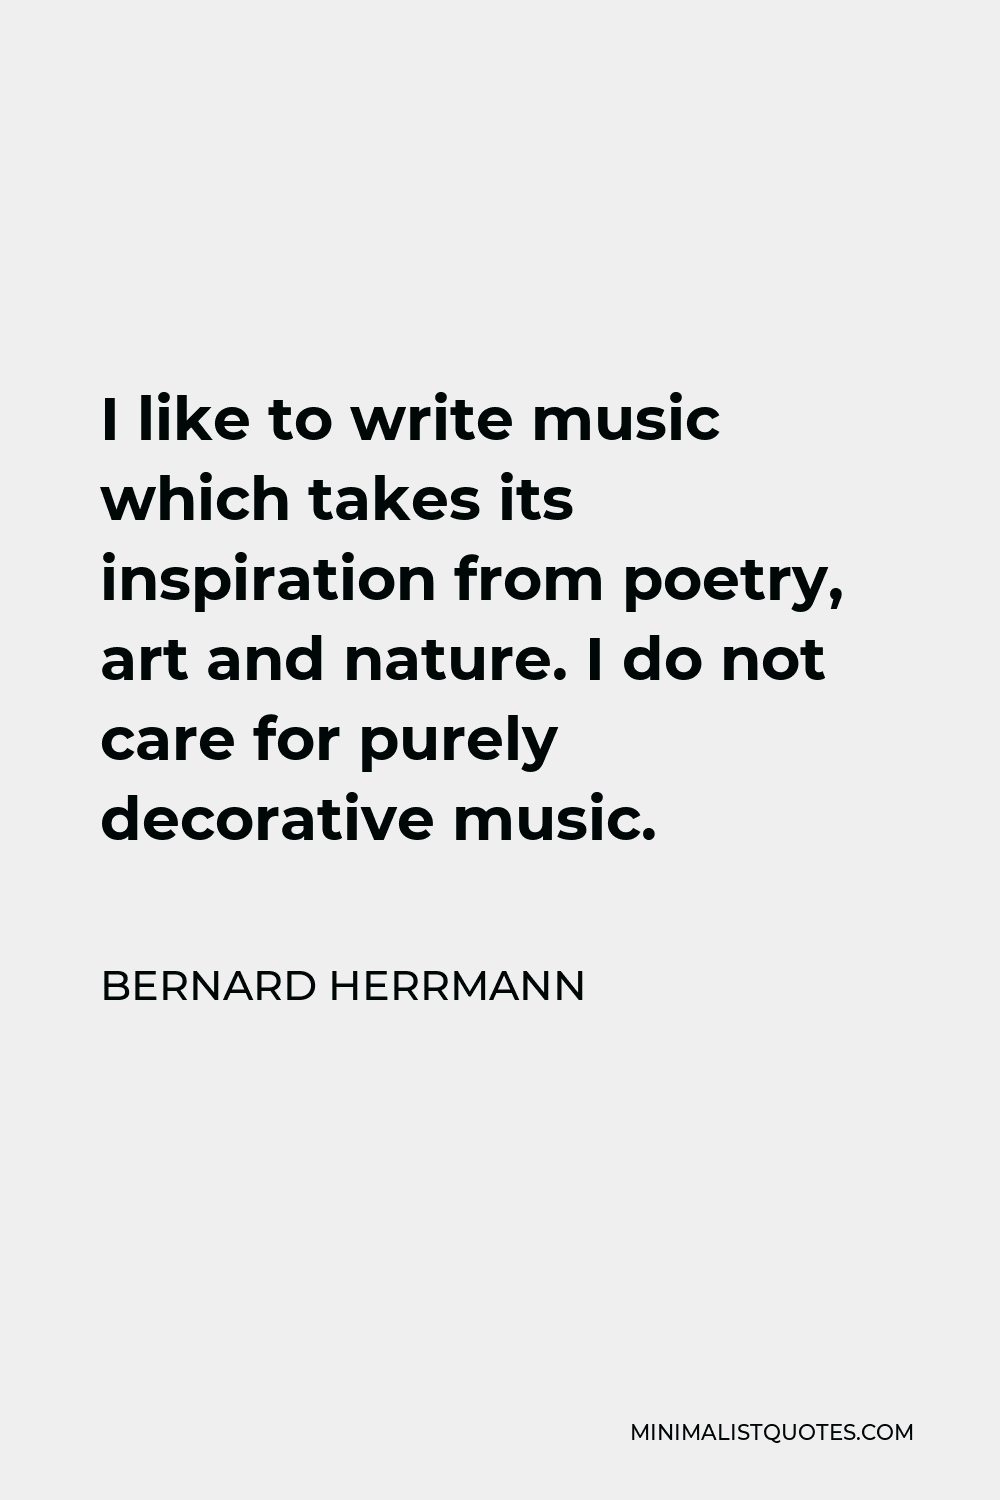 Bernard Herrmann Quote - I like to write music which takes its inspiration from poetry, art and nature. I do not care for purely decorative music.